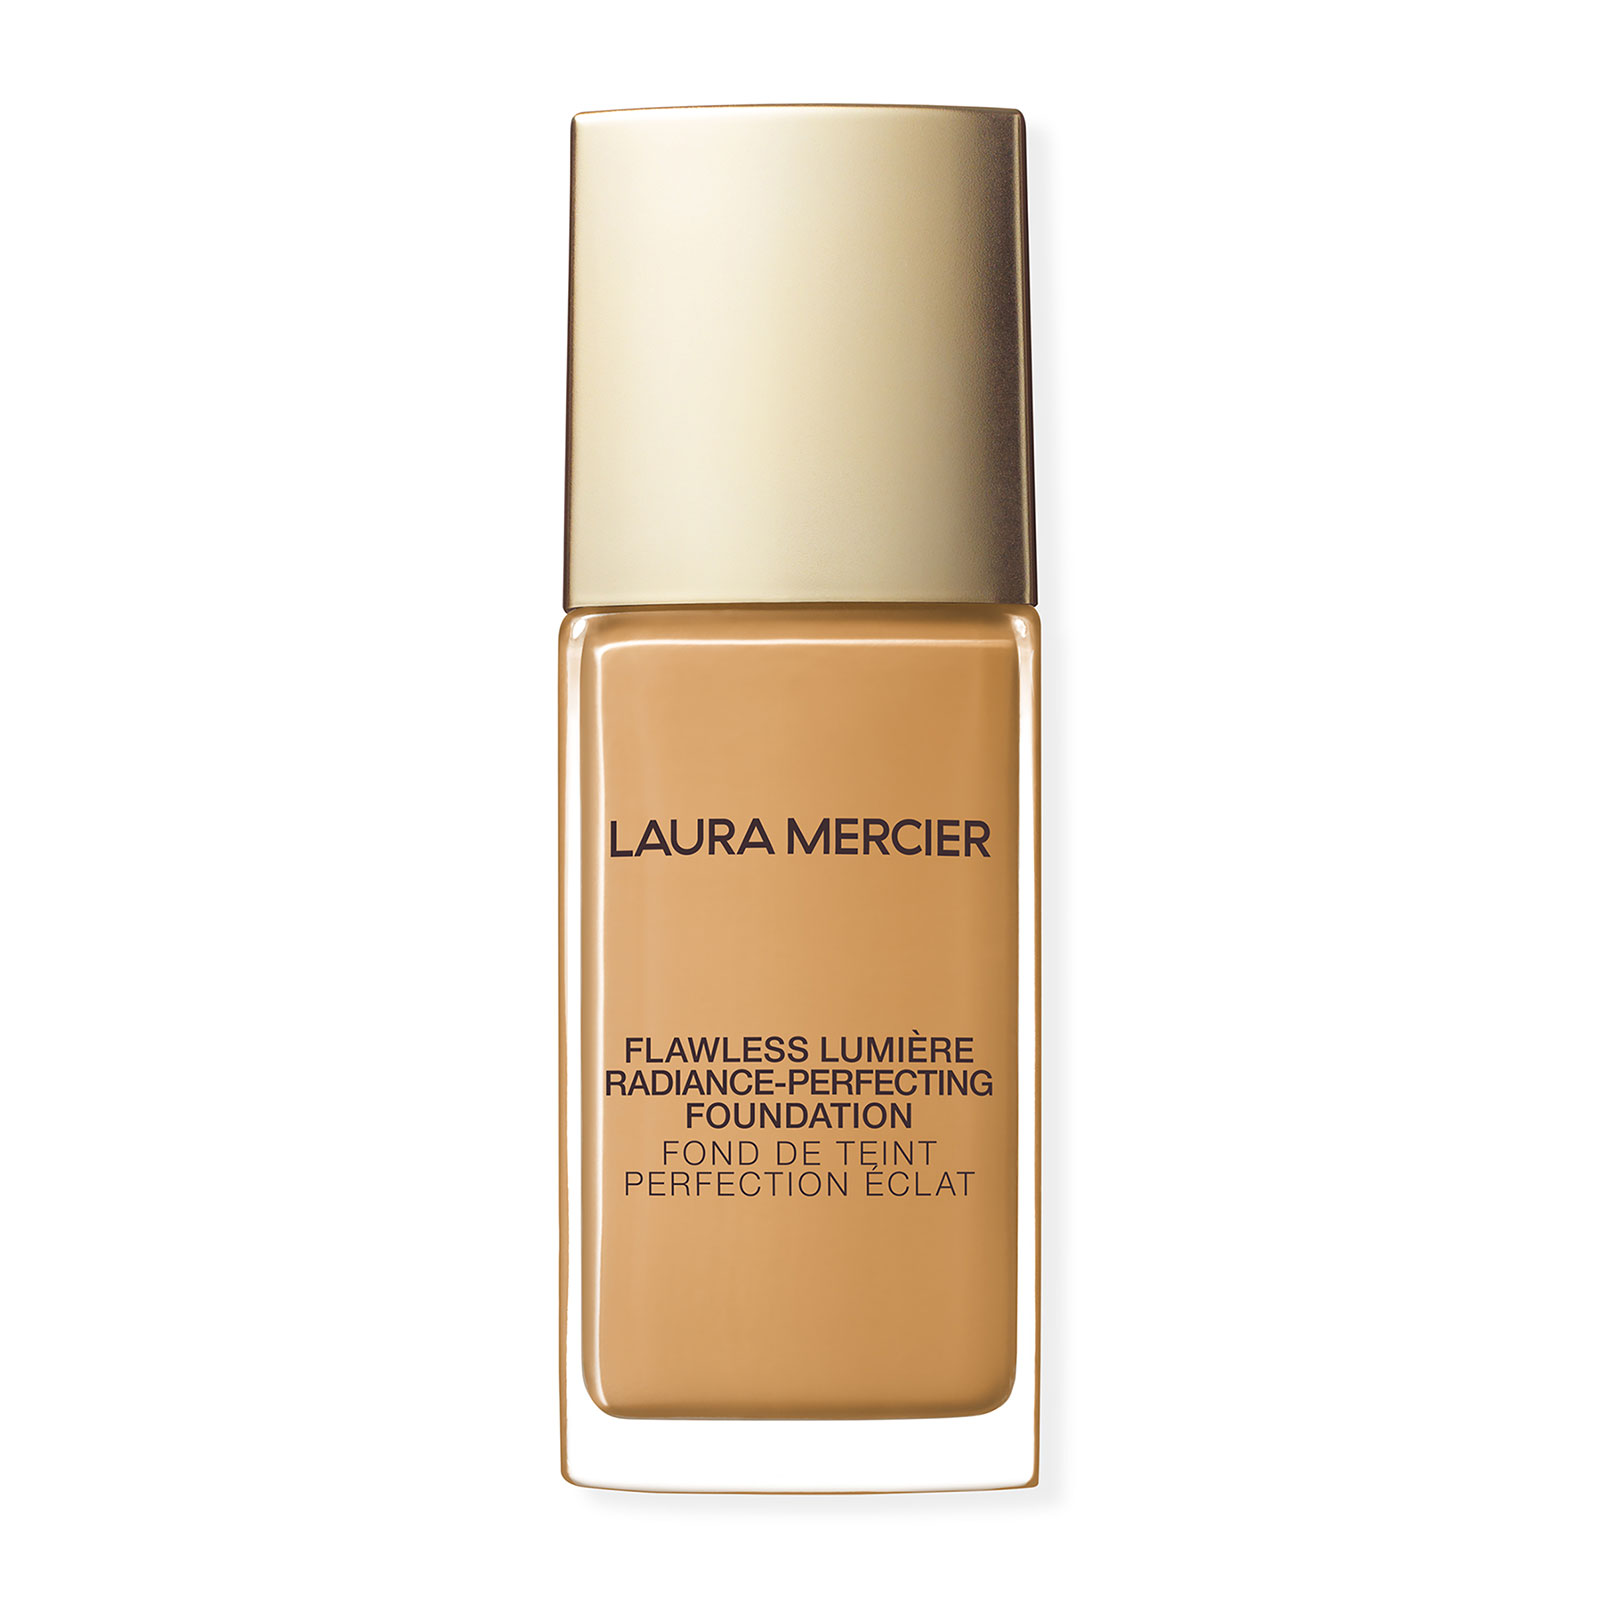 Laura Mercier Flawless Lumiere Radiance-Perfecting Foundation 30Ml 2W2 Butterscotch